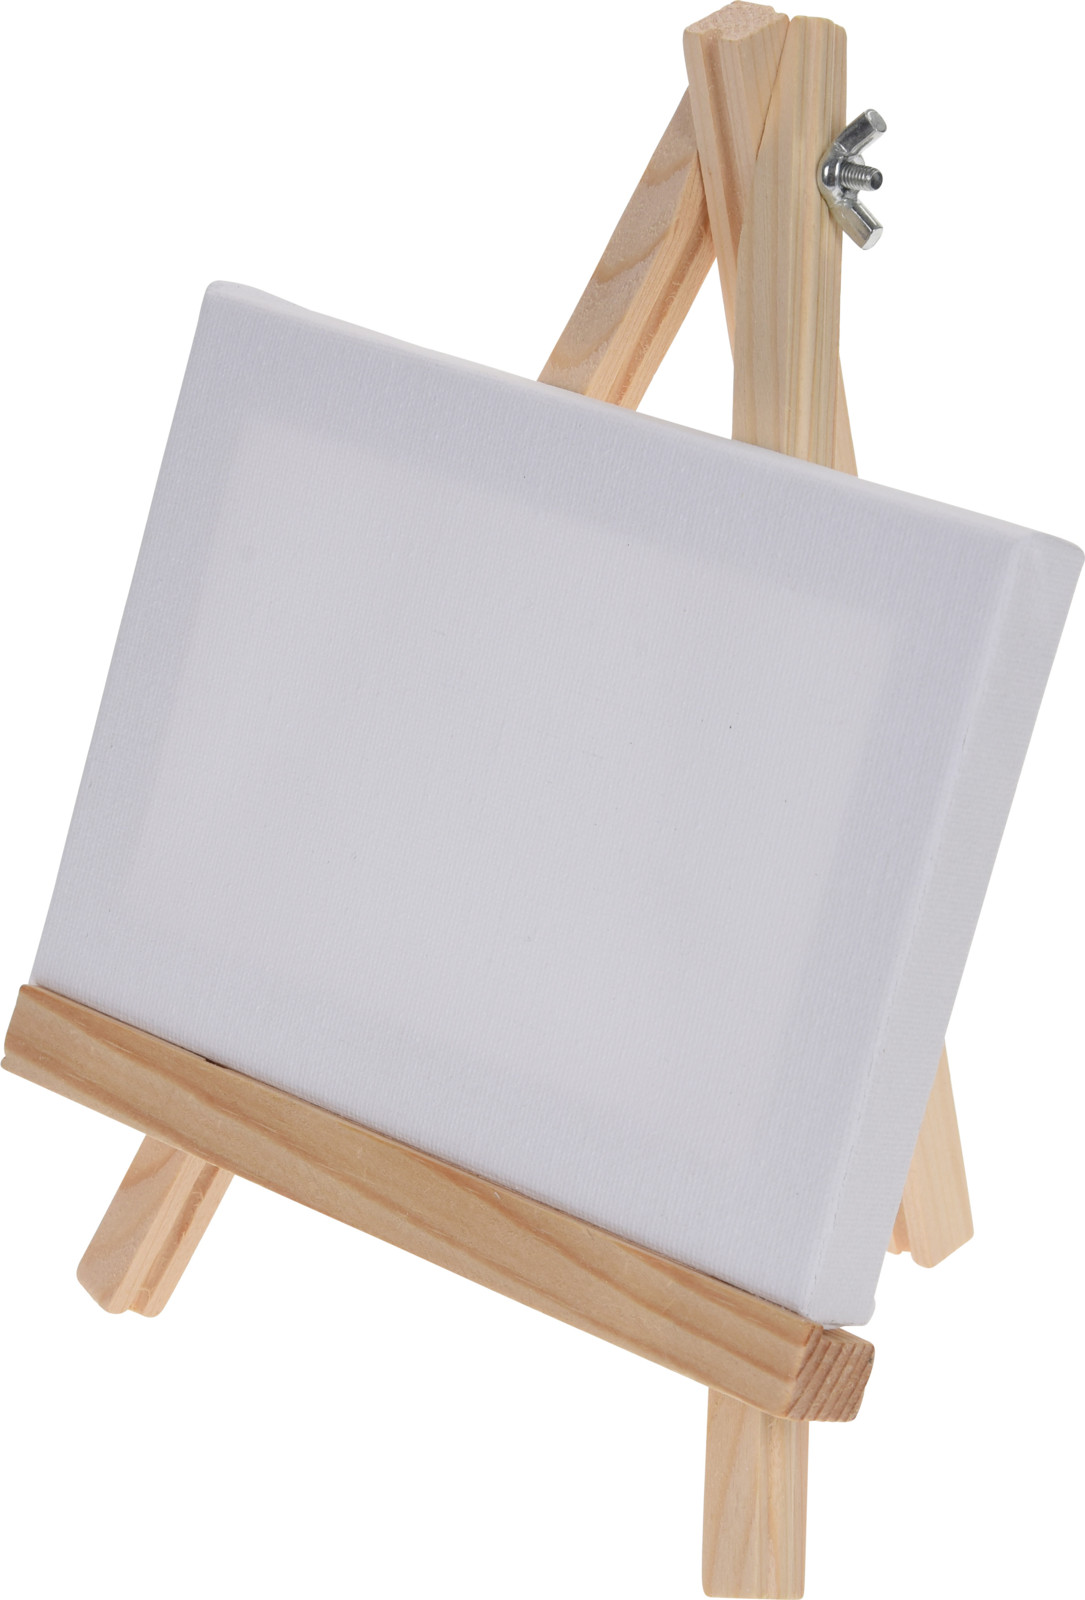 CANVAS WITH EASEL